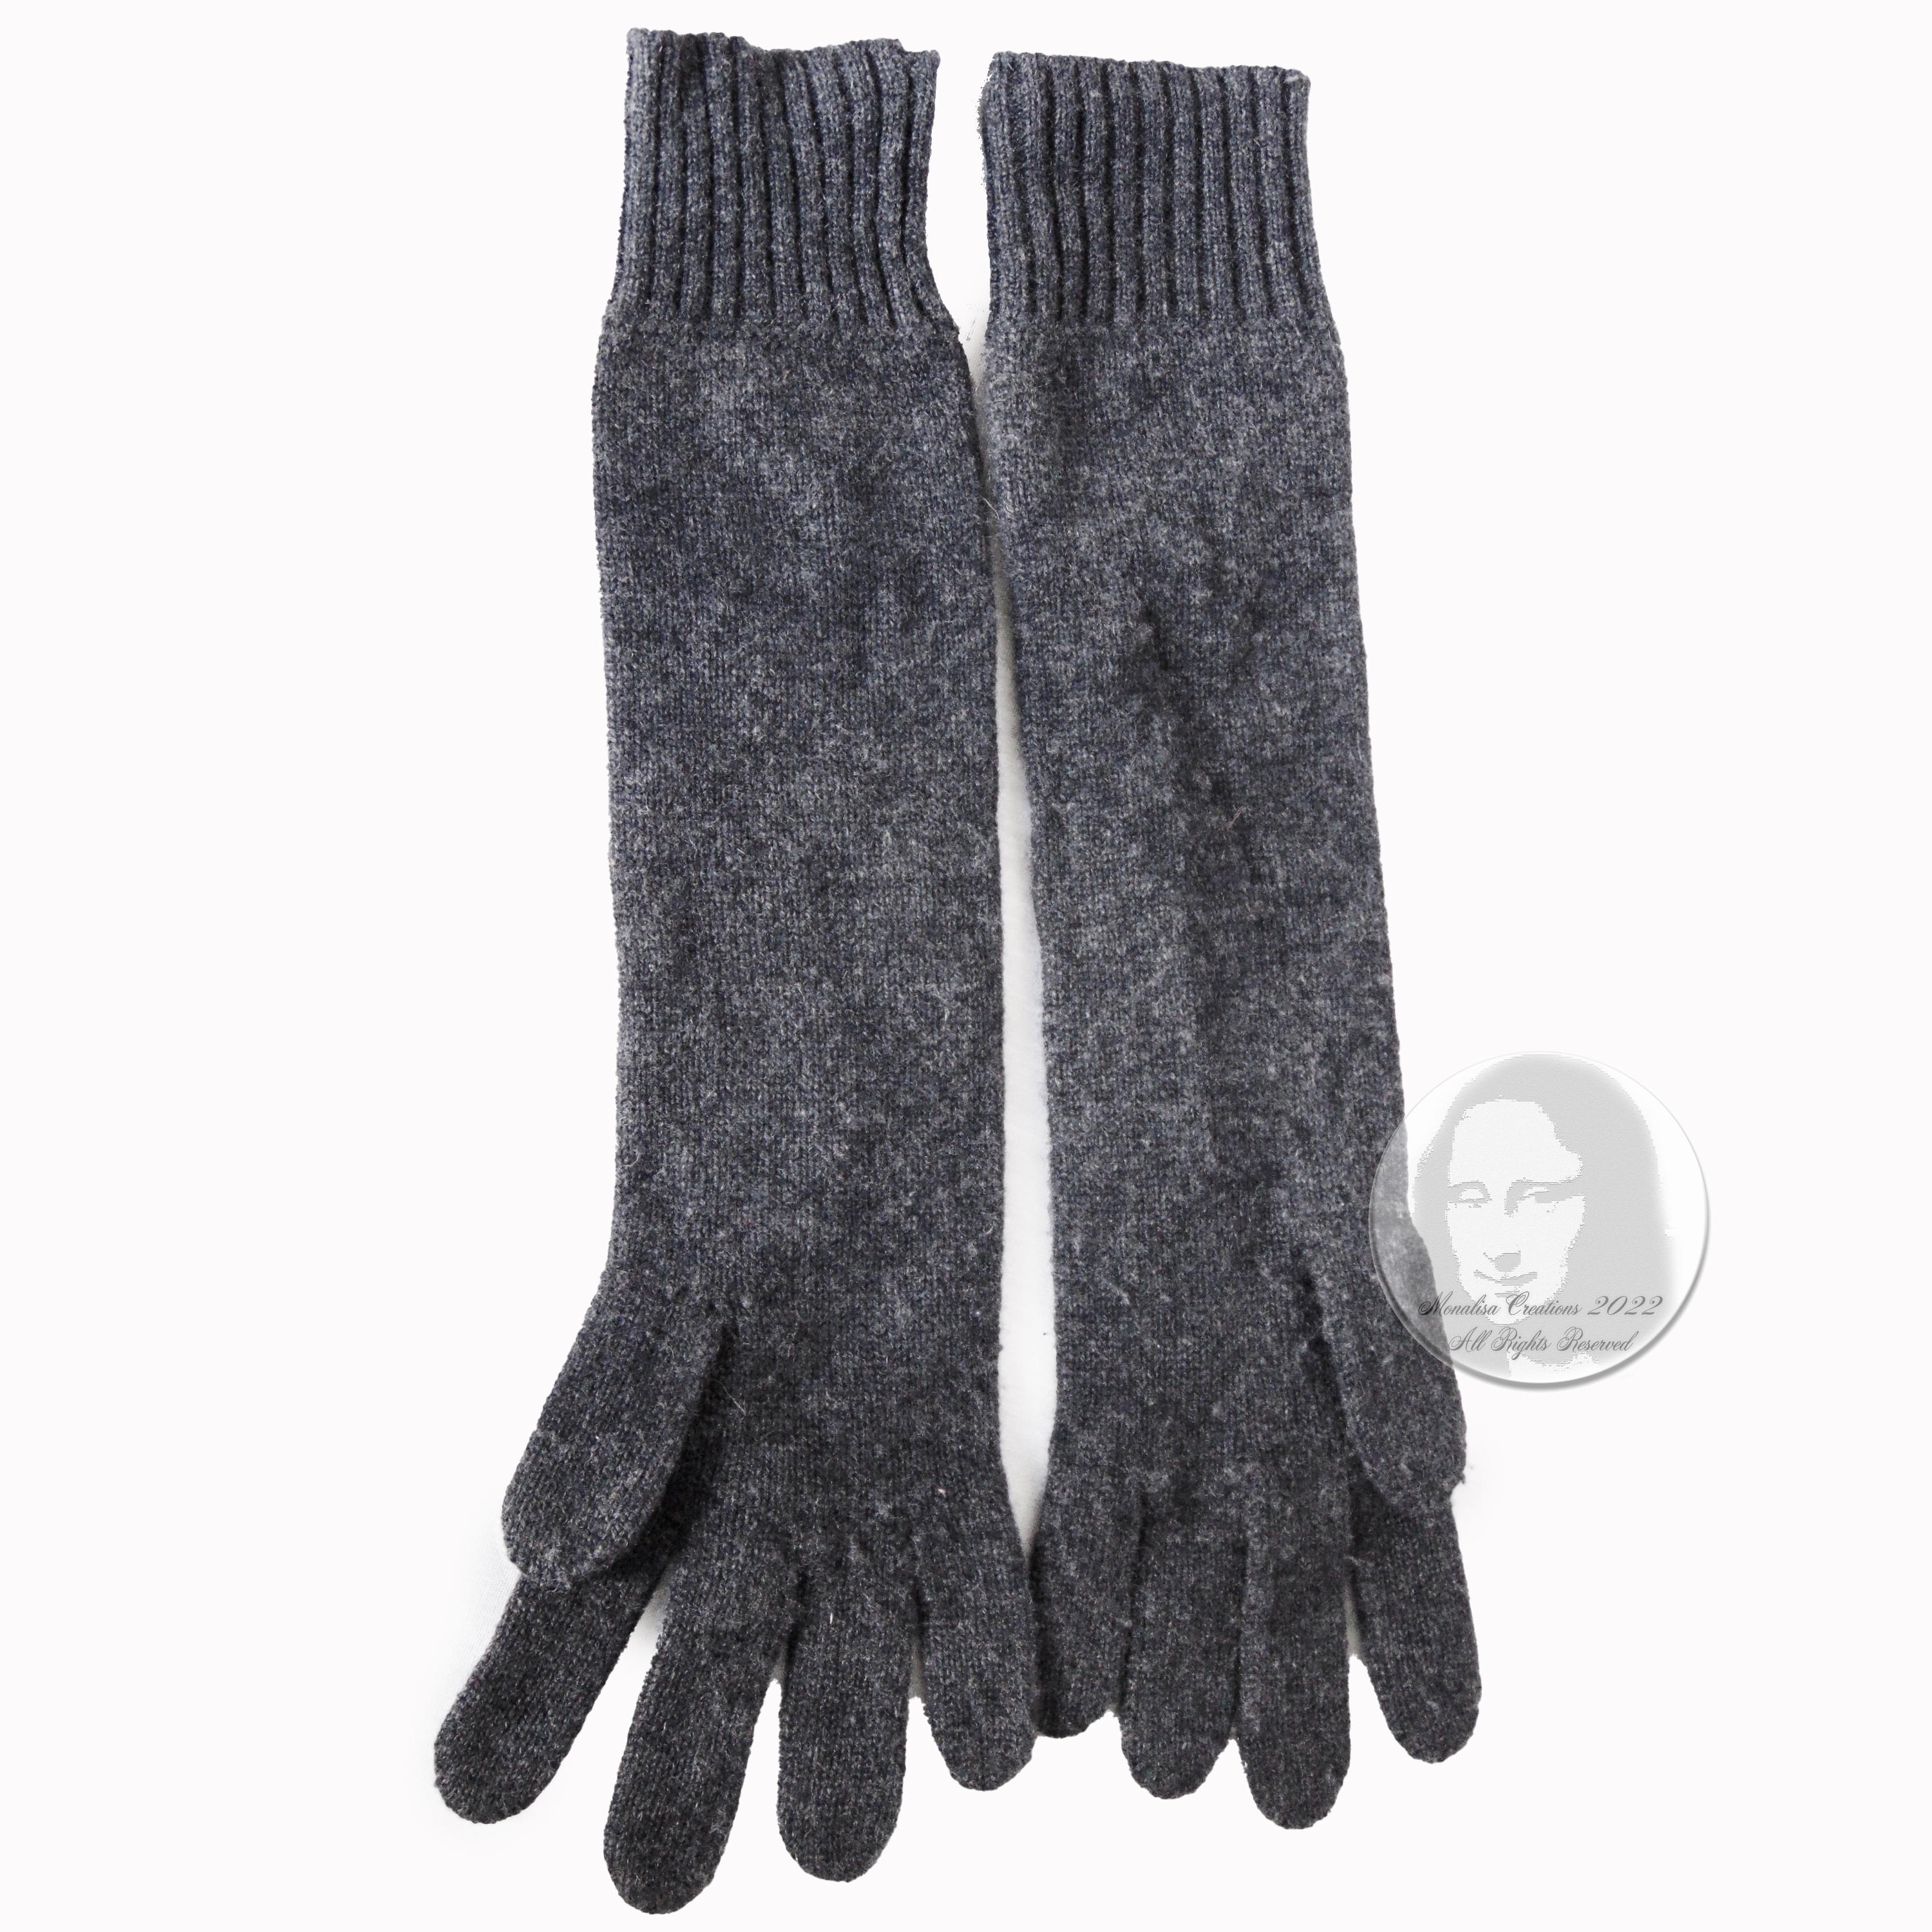 Hermes Gloves Ladies Cashmere Wool Knit Gris Charcoal Gray 2